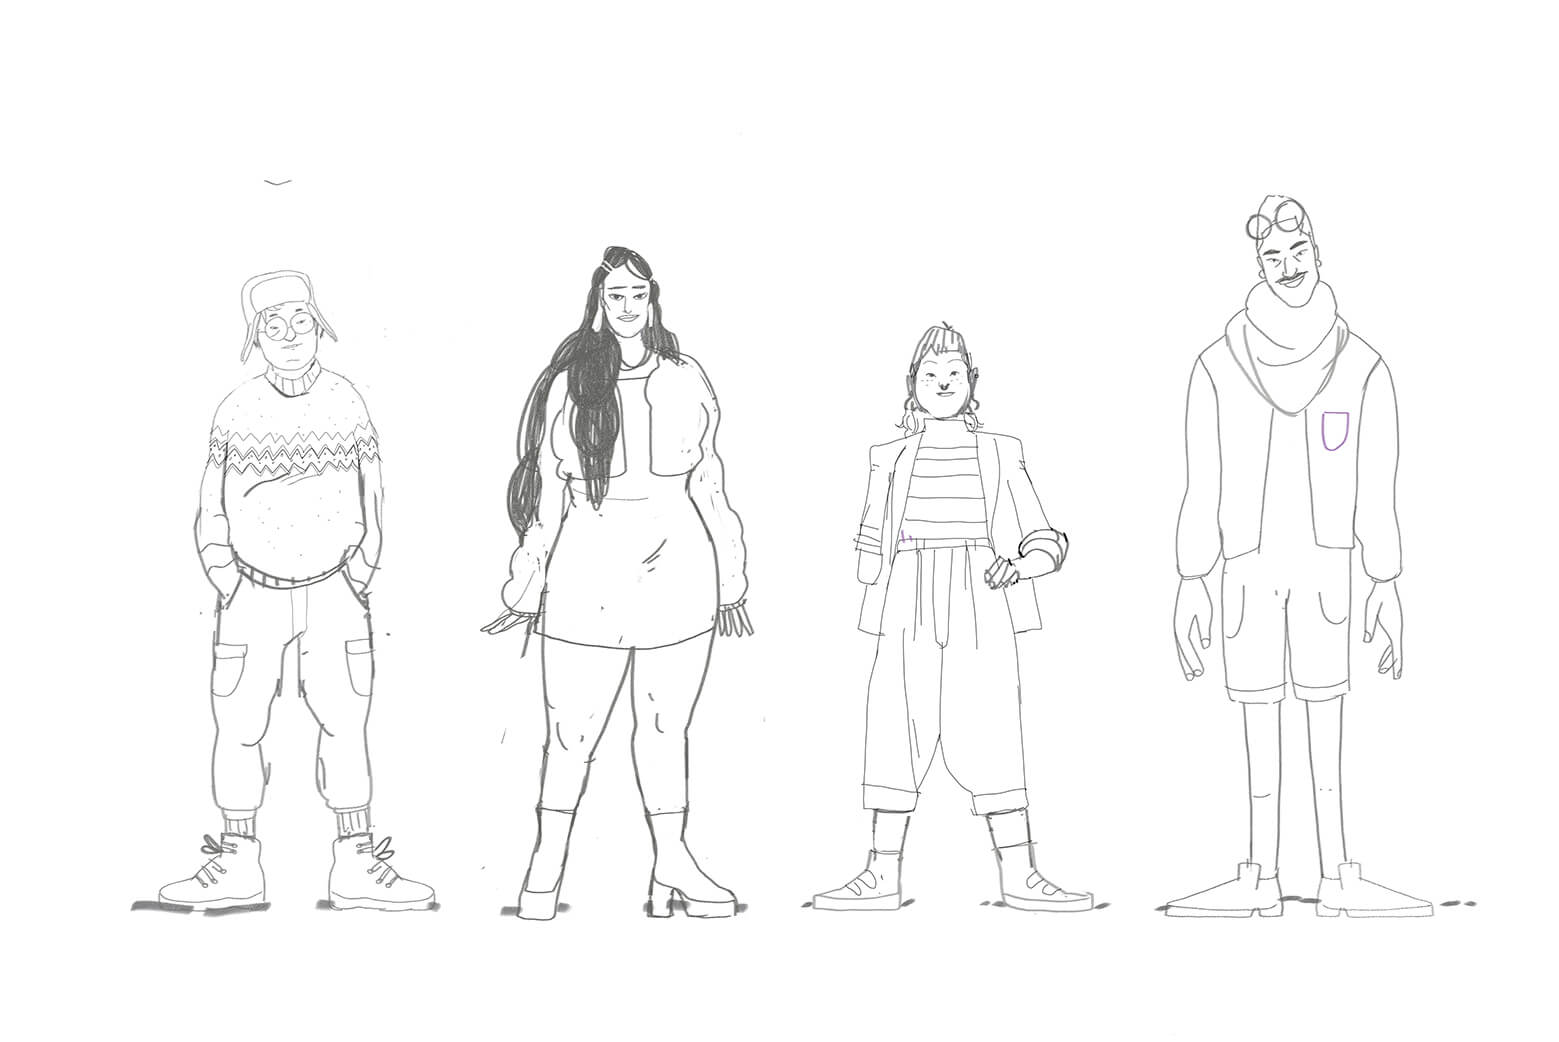 Early sketch of all characters